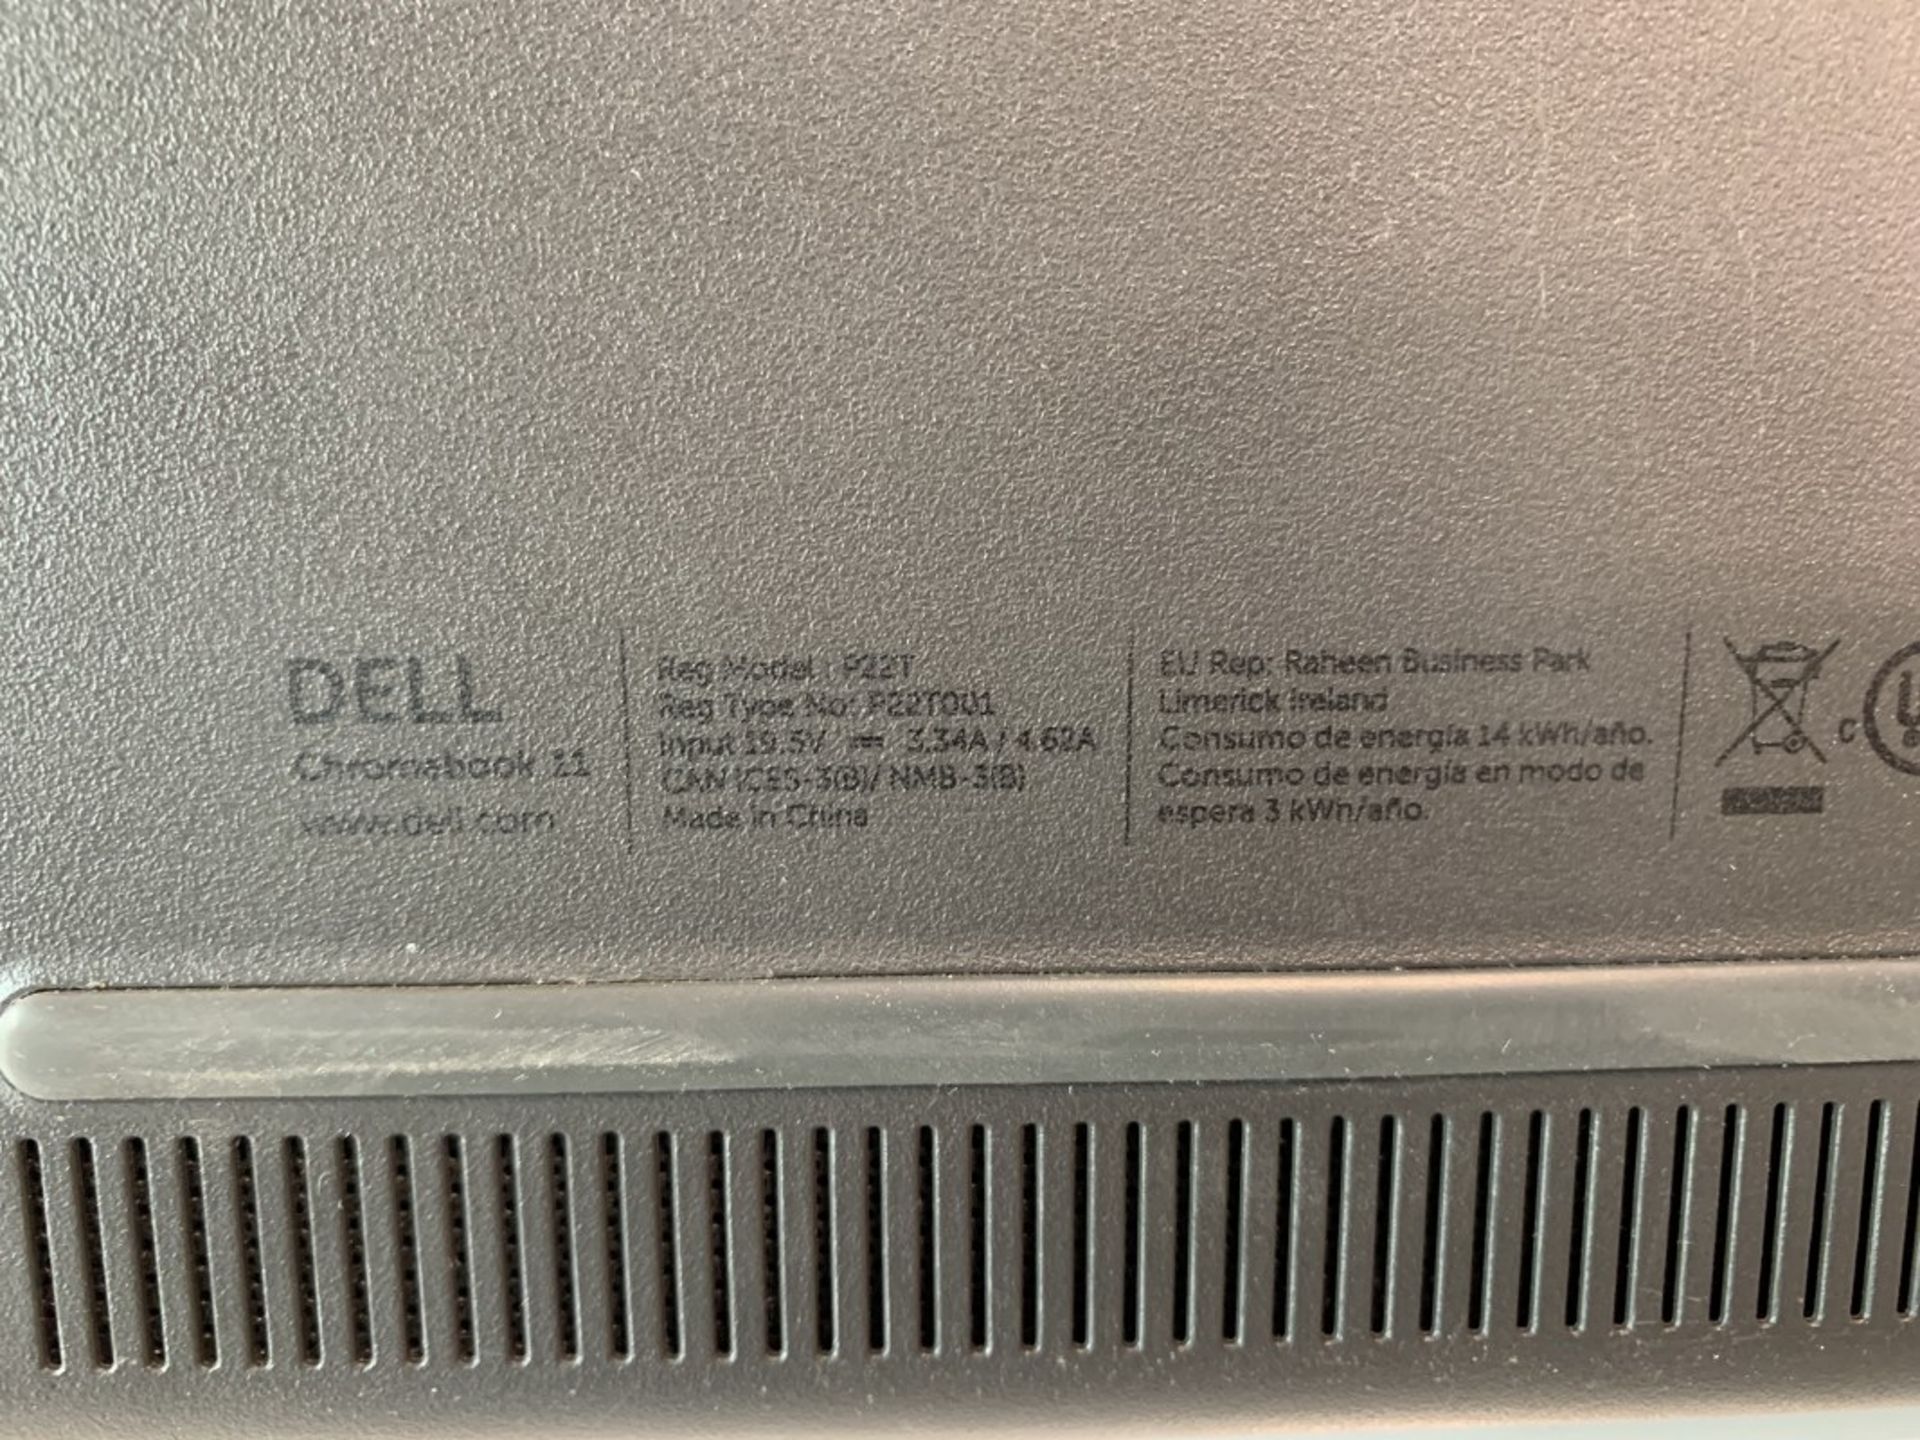 Dell Chromebook 11 P22T Laptop, 11.6In Lcd Notebook, Intel Celeron N2840 Processor 2.58Ghz, 2Gb - Image 3 of 4